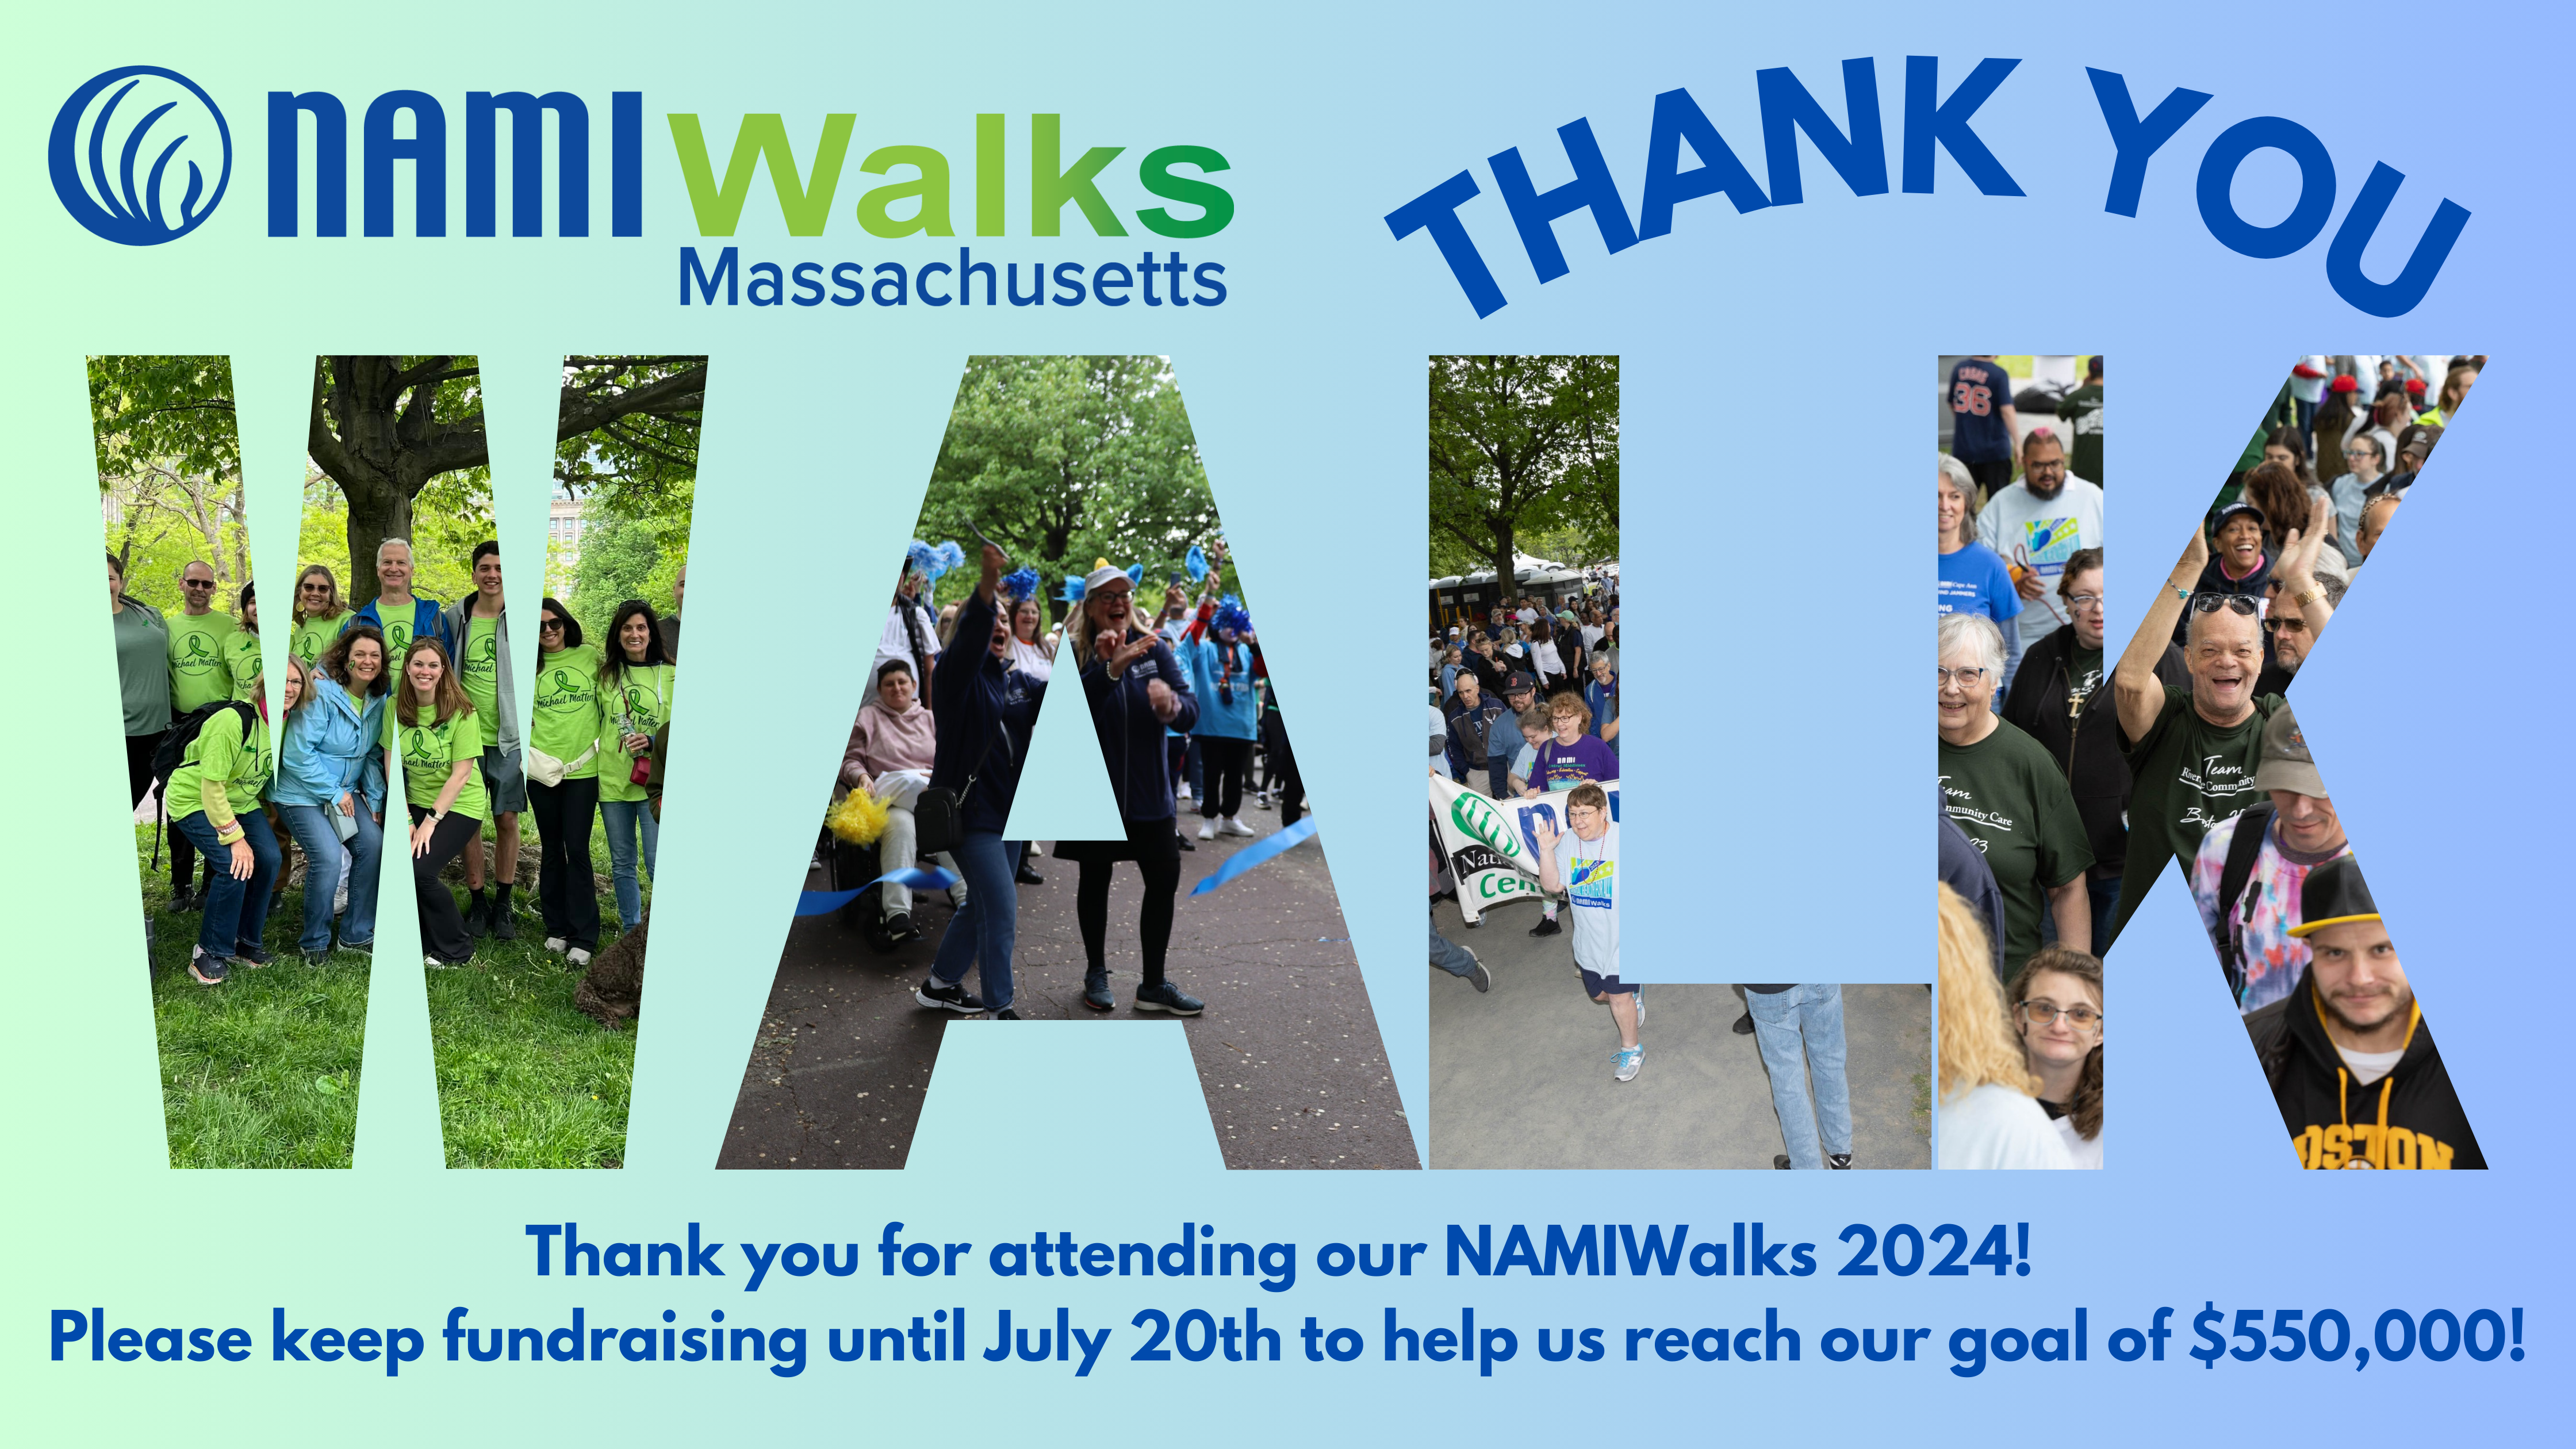 he image is a promotional graphic for NAMIWalks Massachusetts 2024. It features a blue and green gradient background. The main text at the top of the image includes the "NAMI Walks Massachusetts" logo with a blue circular emblem and the word "Walks" in green. The word "WALK" is prominently displayed across the center of the image in large, capital letters, with each letter filled with a different photograph of event participants. The letter 'W' shows a group posing under a tree, 'A' contains an image of people cheering, 'L' presents small groups in conversation, and 'K' depicts participants walking. Above the word "WALK," the phrase "THANK YOU" is arched in blue text. At the bottom in blue text, a message reads: "Thank you for attending our NAMIWalks 2024! Please keep fundraising until July 20th to help us reach our goal of $550,000!"